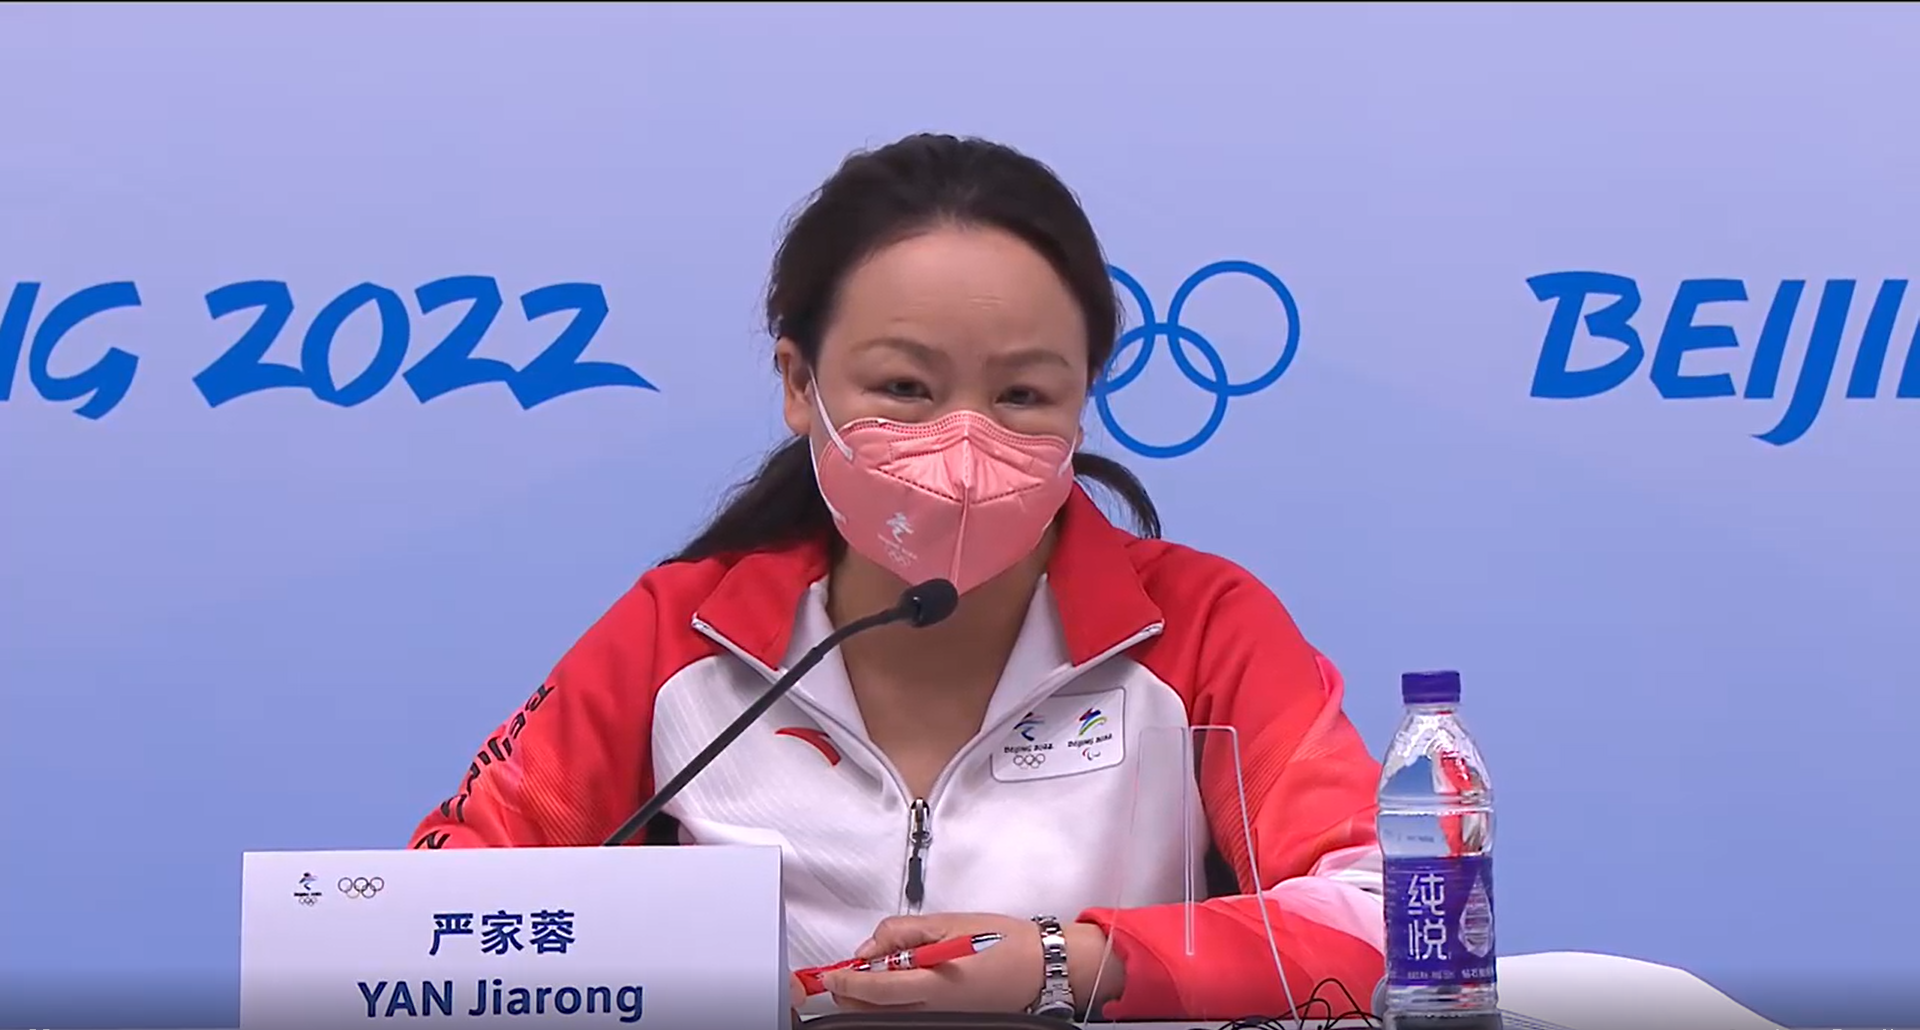 Beijing 2022 spokesperson Yan Jiarong made several interventions during the press conference ©IOC